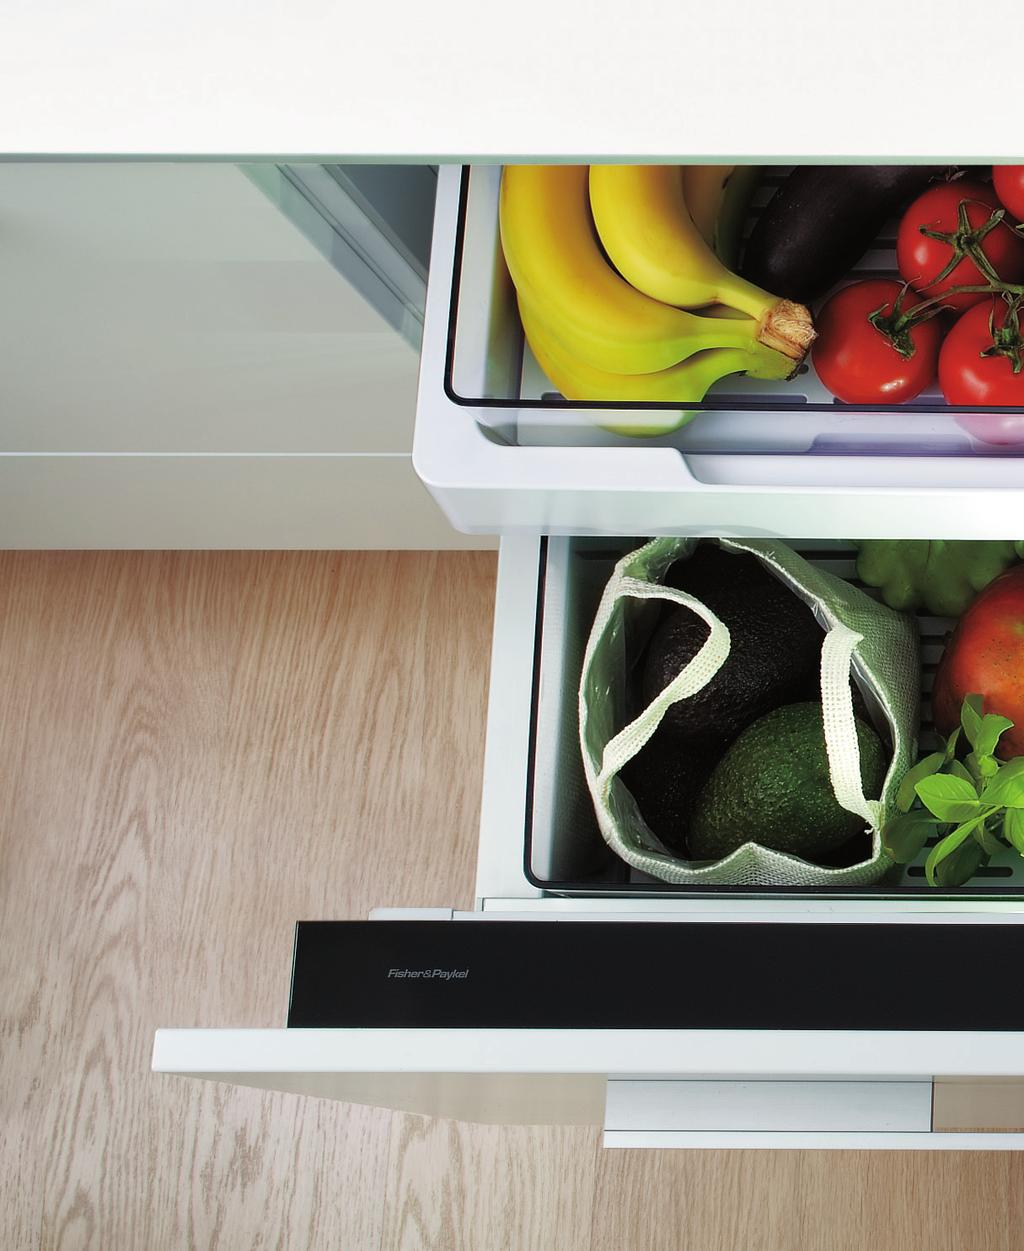 cooldrawer Key features Designed to change from refrigerator to freezer at the touch of a button.